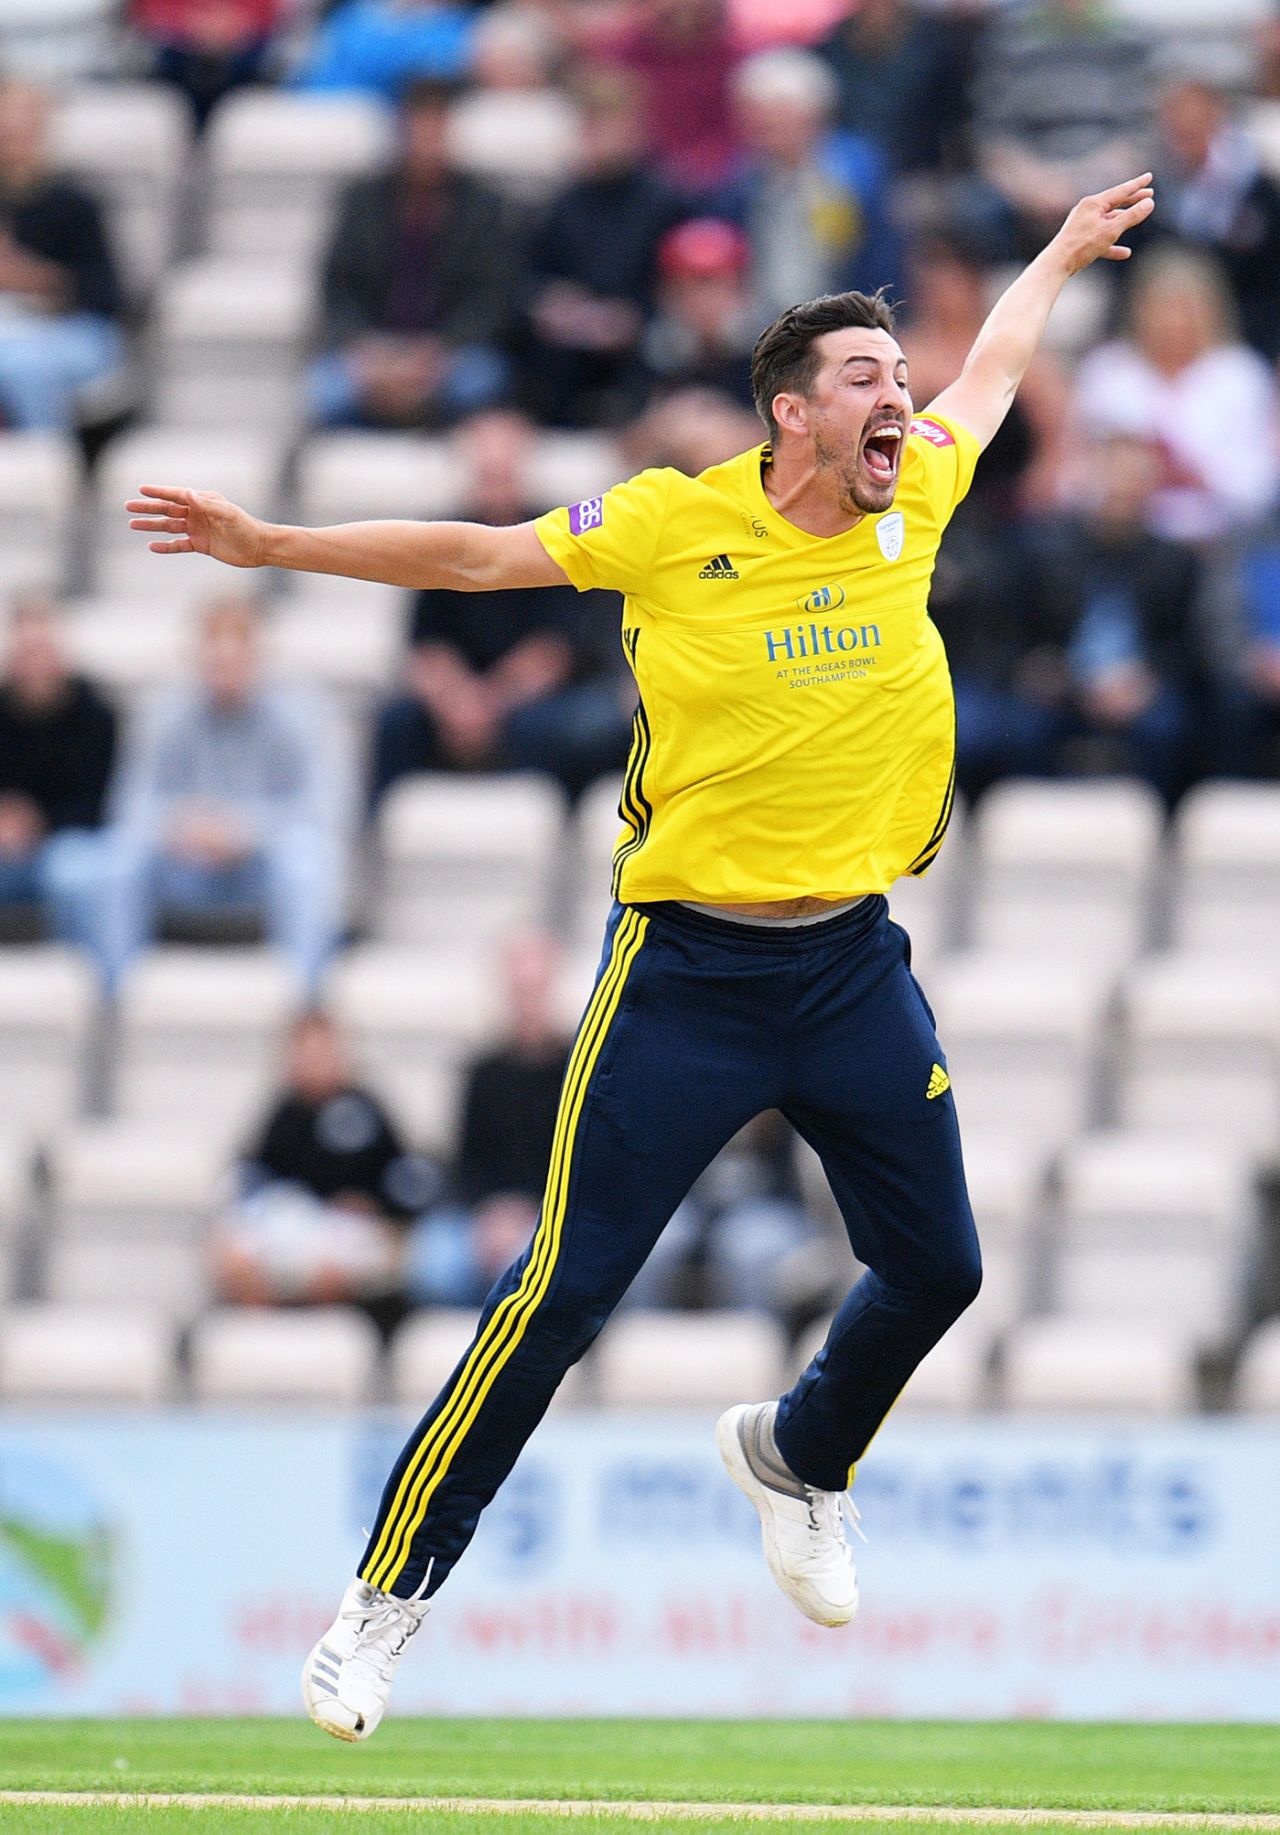 Chris Wood celebrates a wicket, Hampshire v Somerset, Vitality Blast, South Group, August 9, 2019